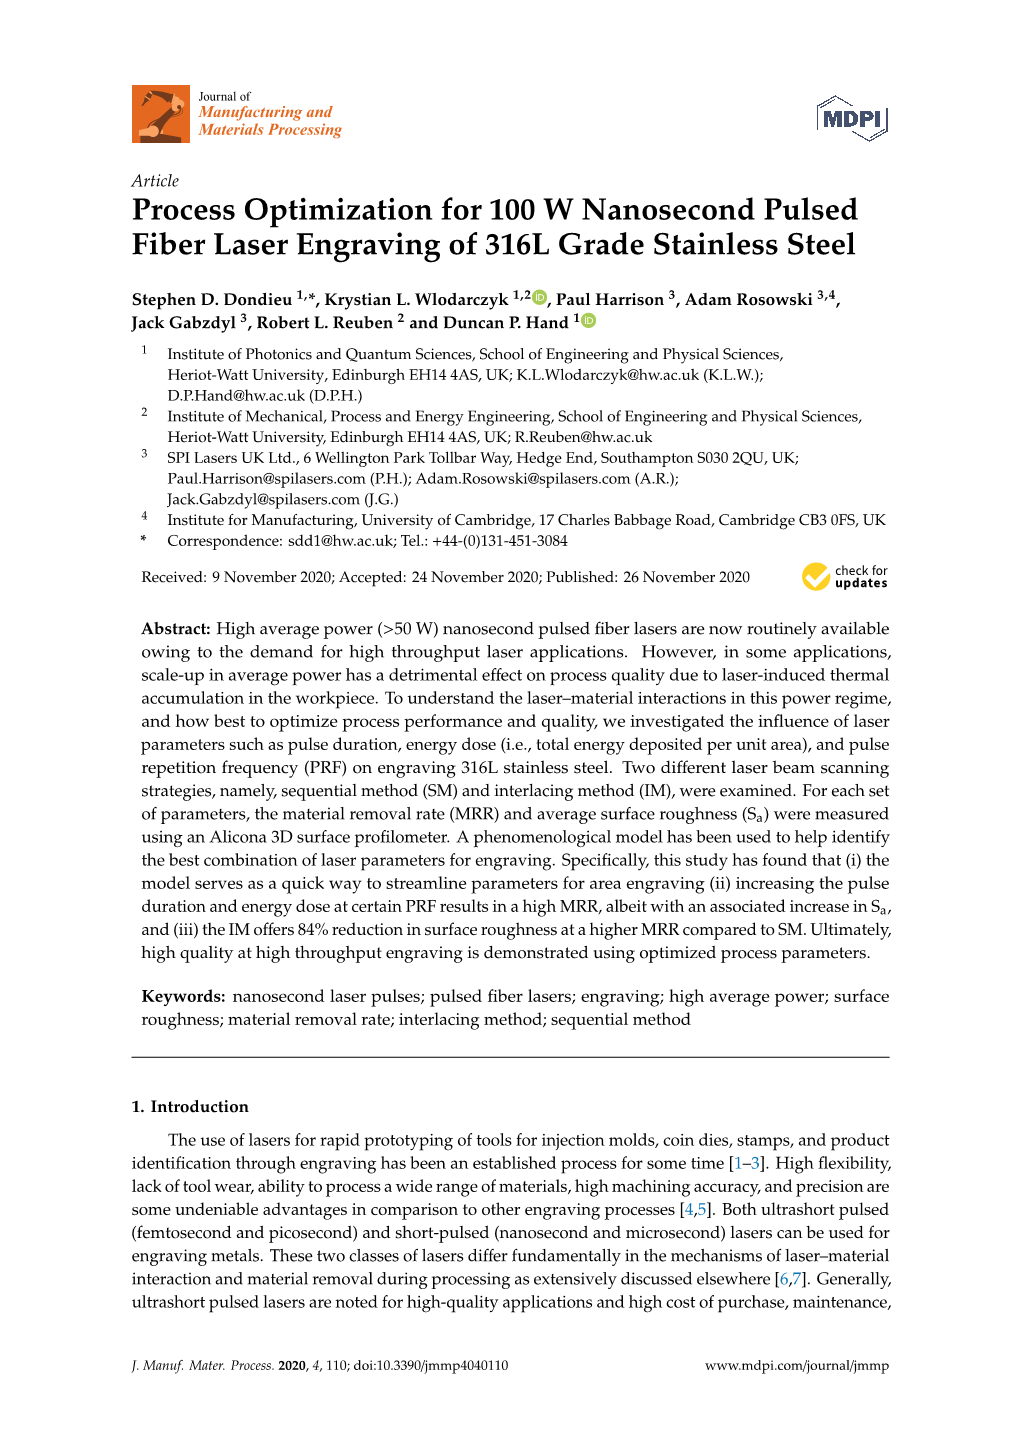 Process Optimization for 100 W Nanosecond Pulsed Fiber Laser Engraving of 316L Grade Stainless Steel